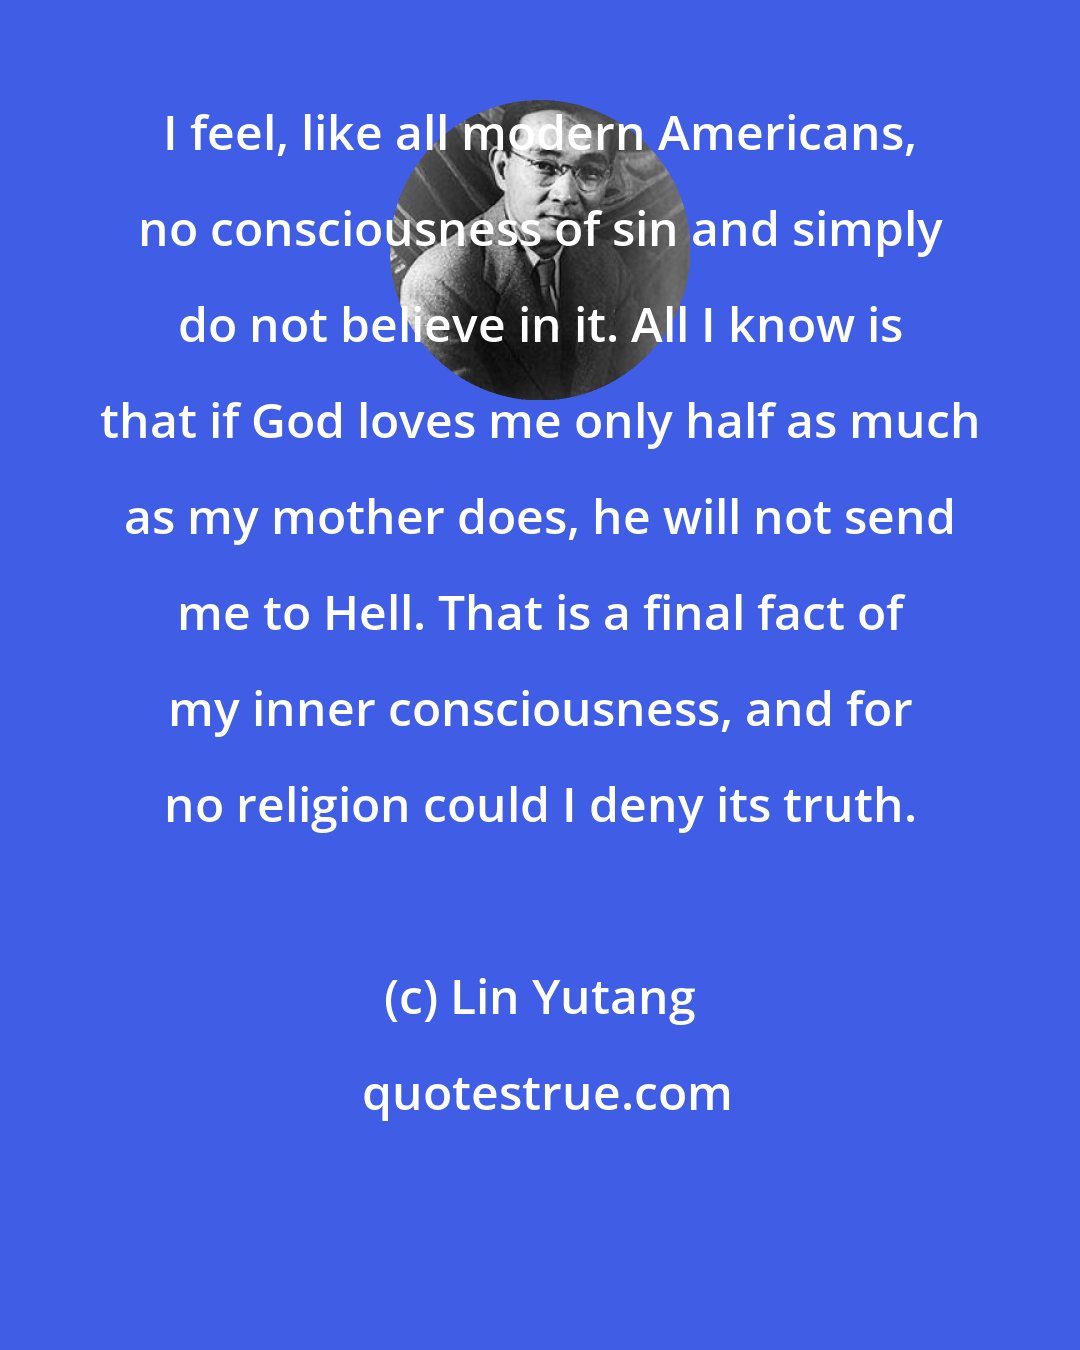 Lin Yutang: I feel, like all modern Americans, no consciousness of sin and simply do not believe in it. All I know is that if God loves me only half as much as my mother does, he will not send me to Hell. That is a final fact of my inner consciousness, and for no religion could I deny its truth.